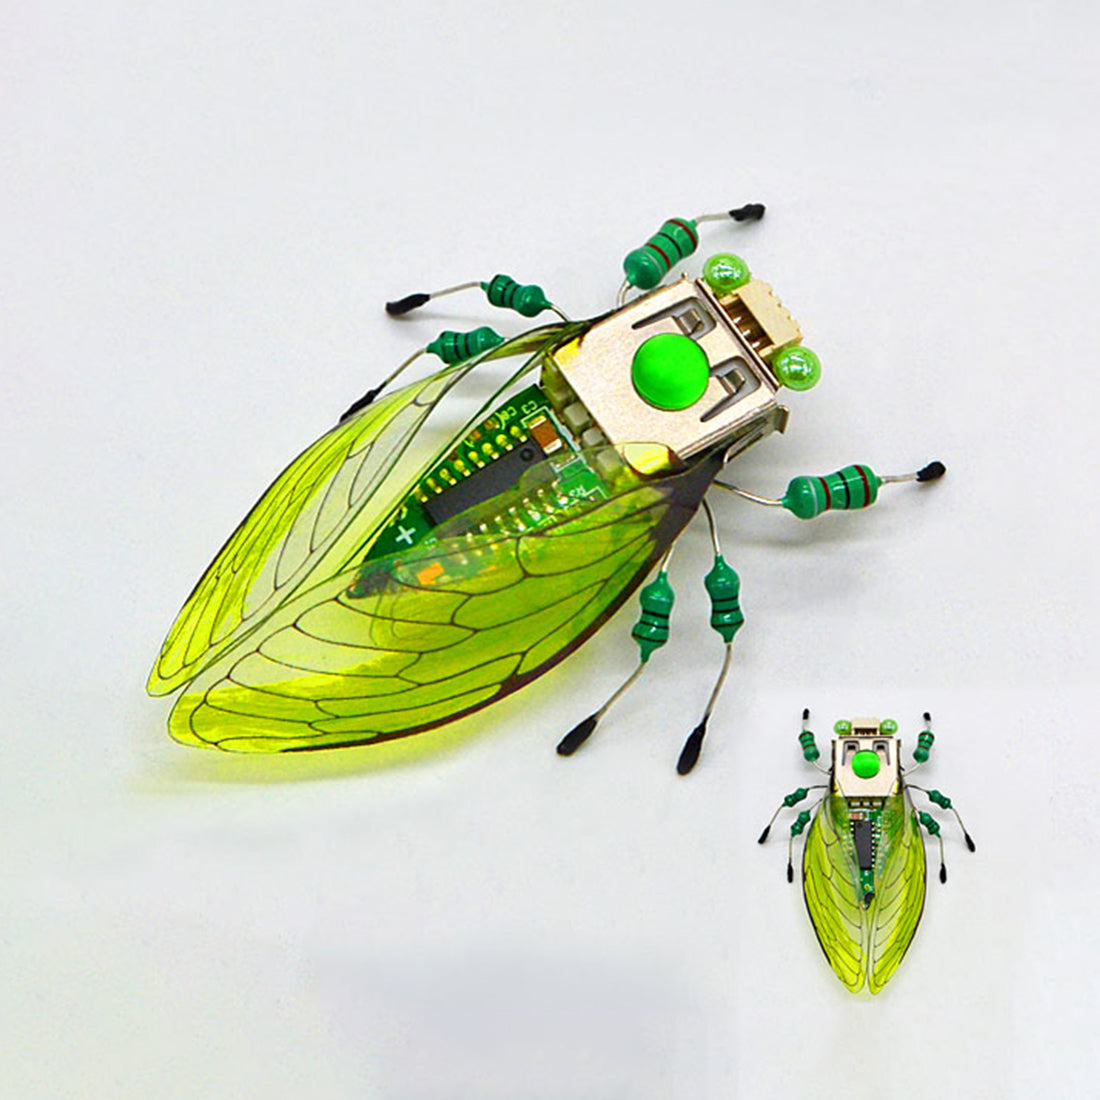 insect-diy-assembly-model-cicada-toy-handmade-puzzle-figures